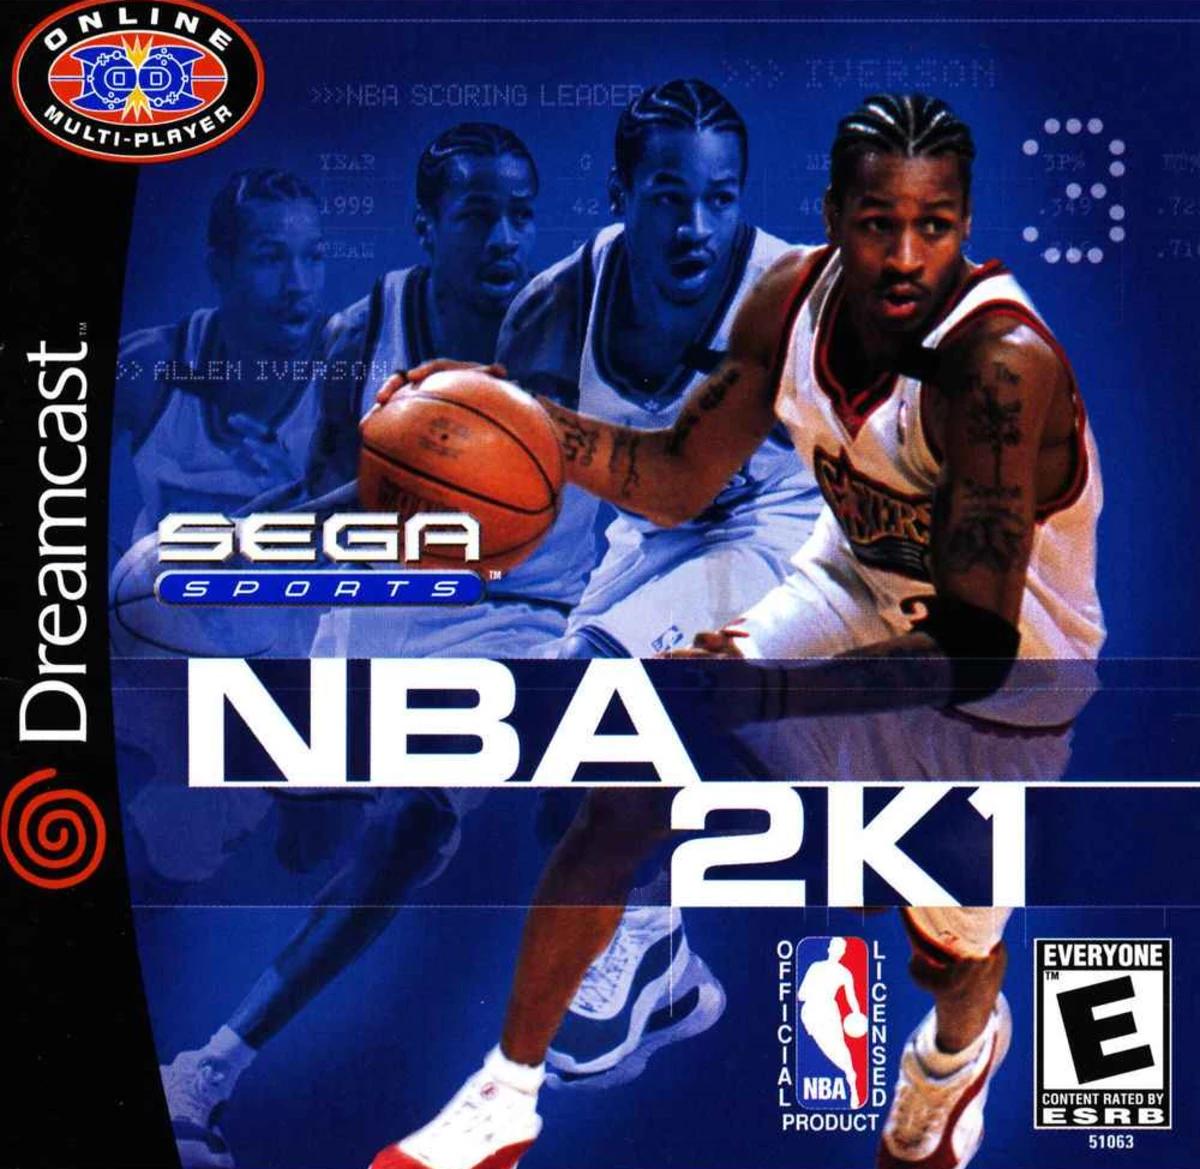 Allen Iverson on the NBA 2K1 cover.